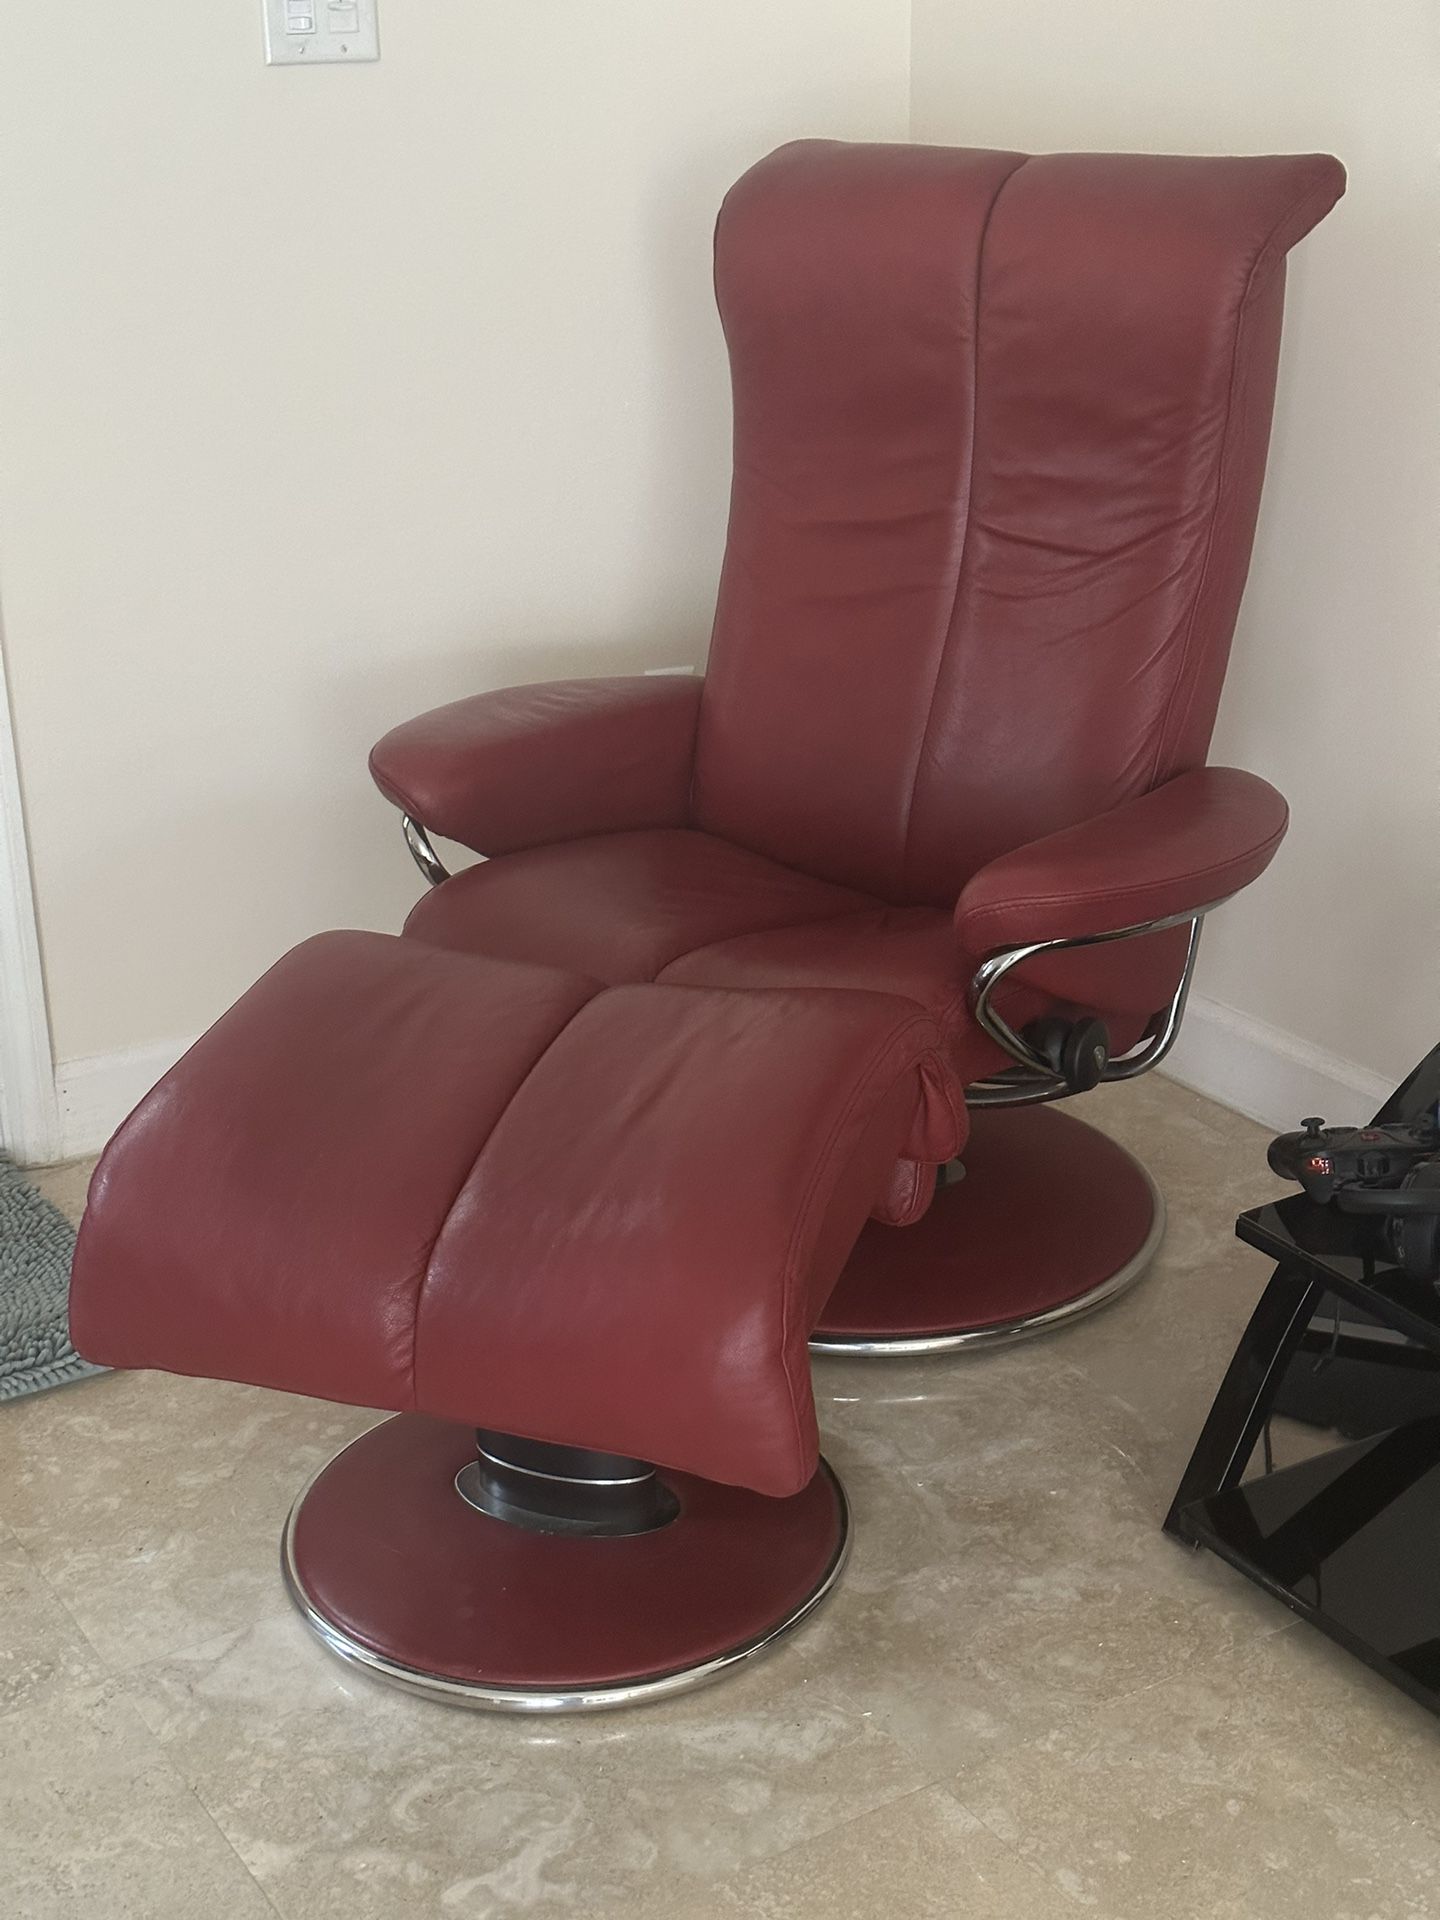 Luxurious Stressless Swivel Recliner Chair With Ottoman